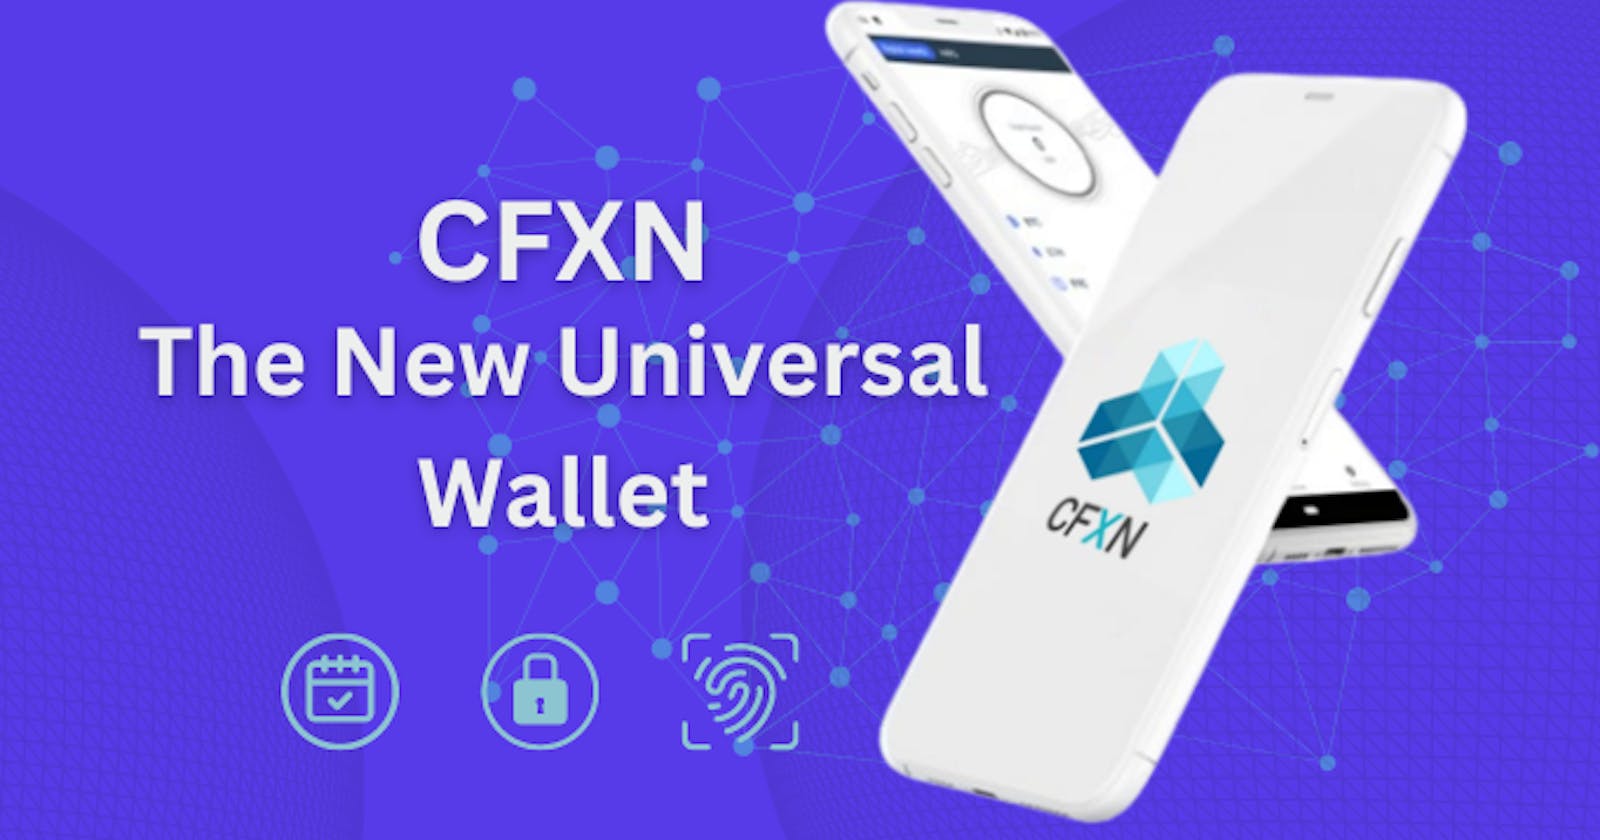 Introducing The New Universal Wallet